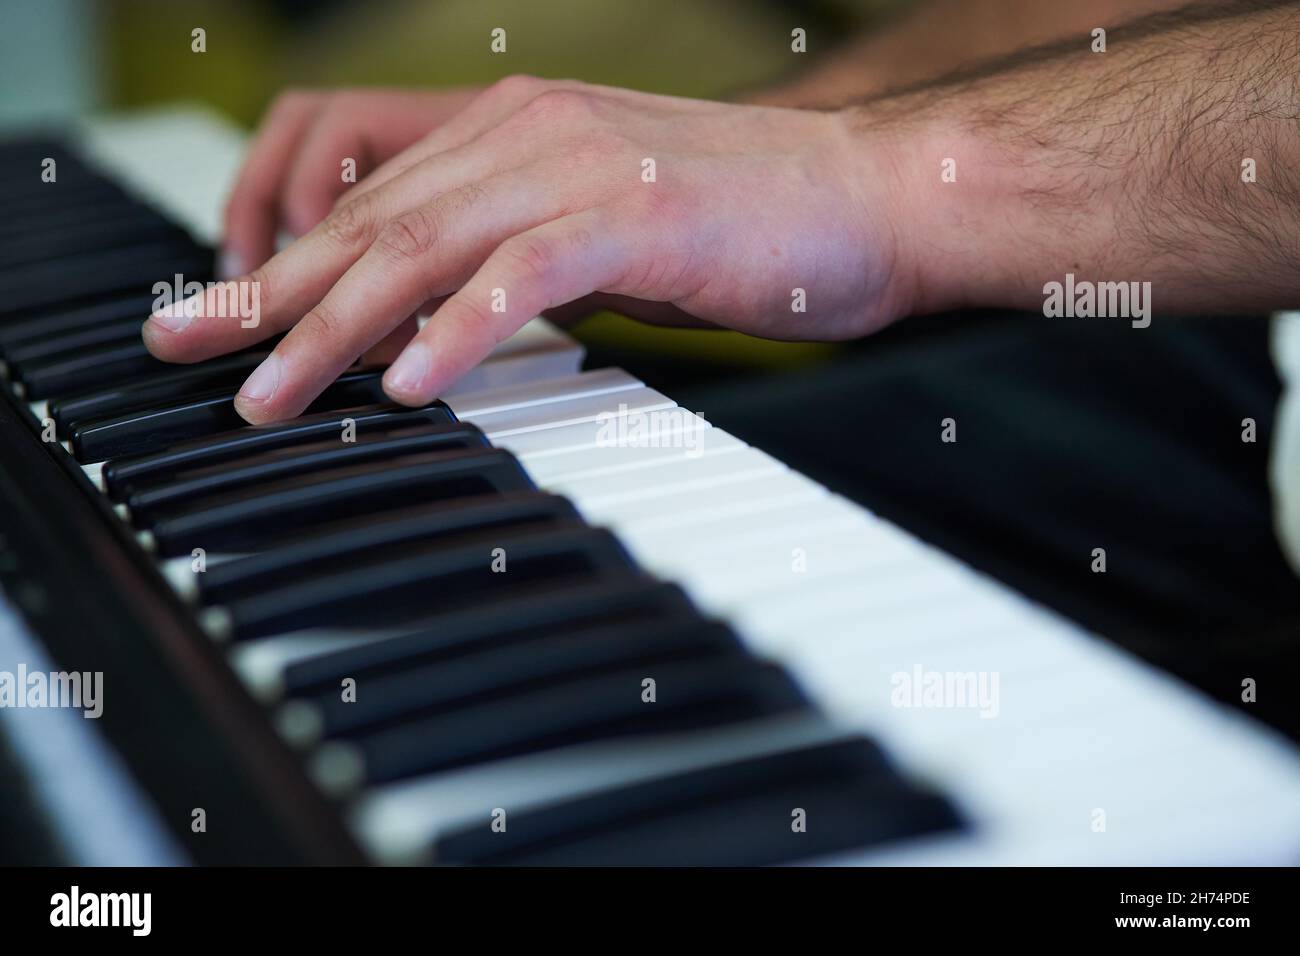 close-up detail of the pianist's fingers while playing his instrument Stock Photo